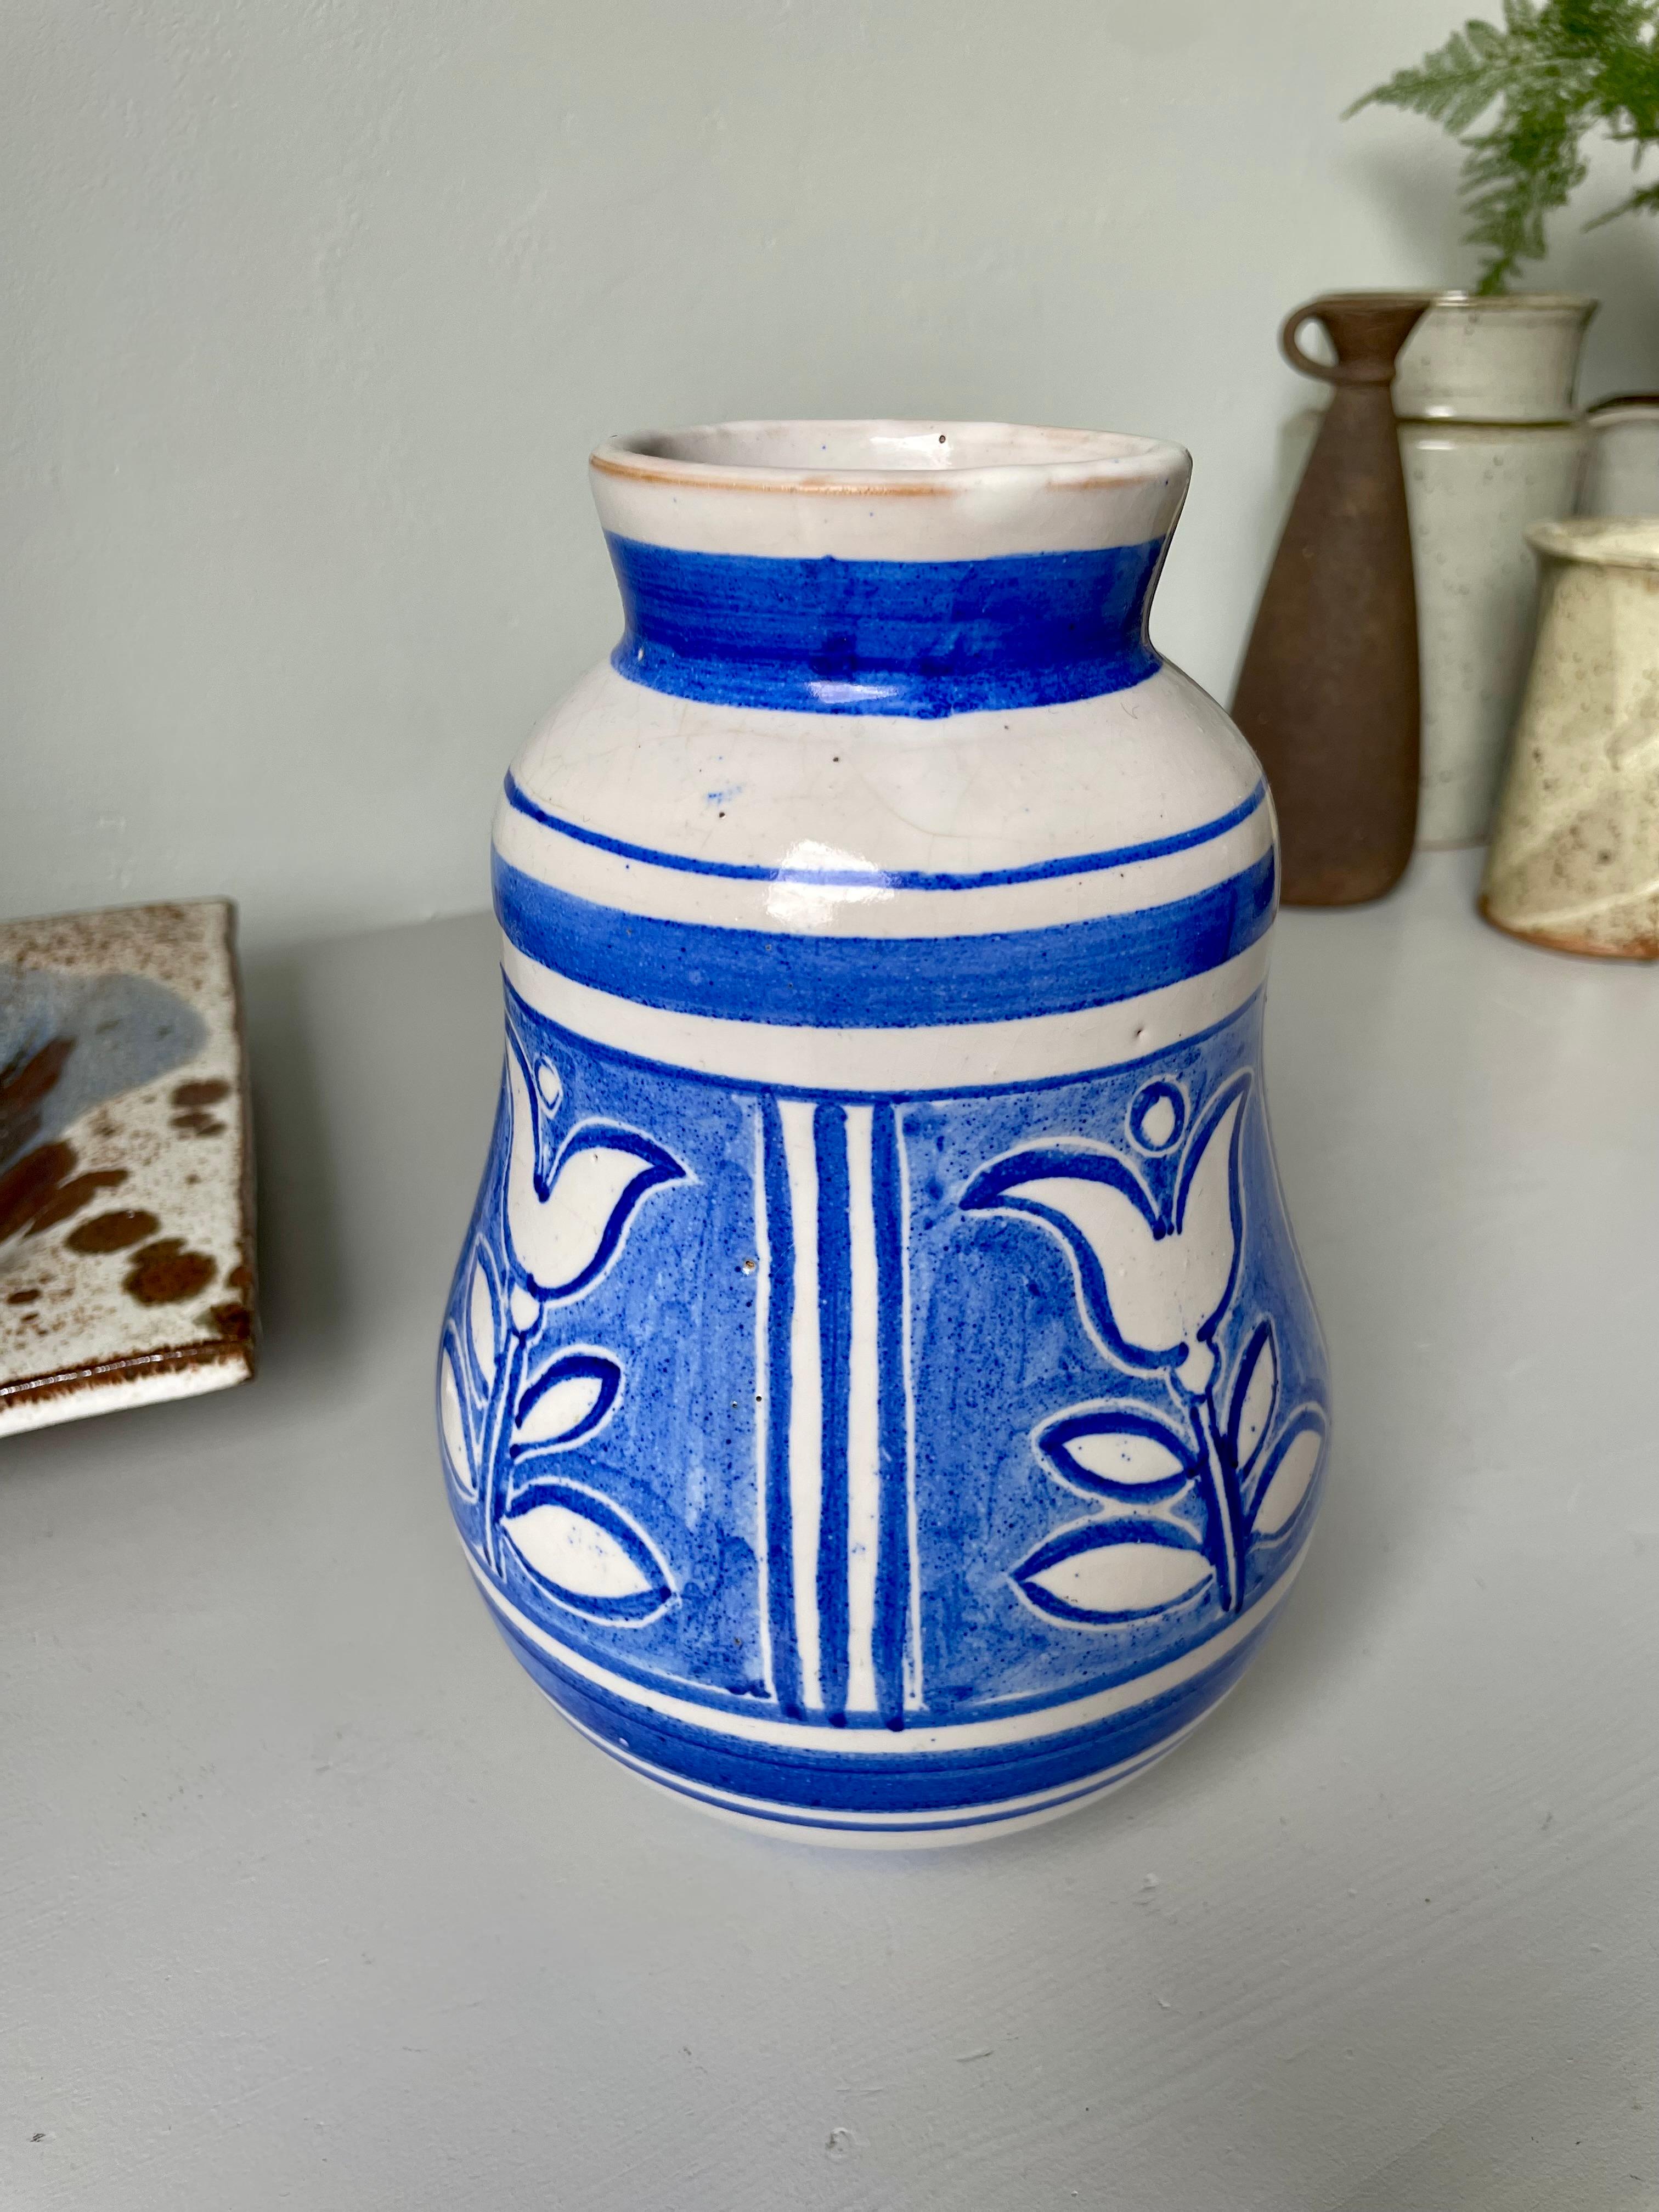 Nordic White Hand-Decorated Blue Floral Ceramic Vase, 1950s For Sale 3